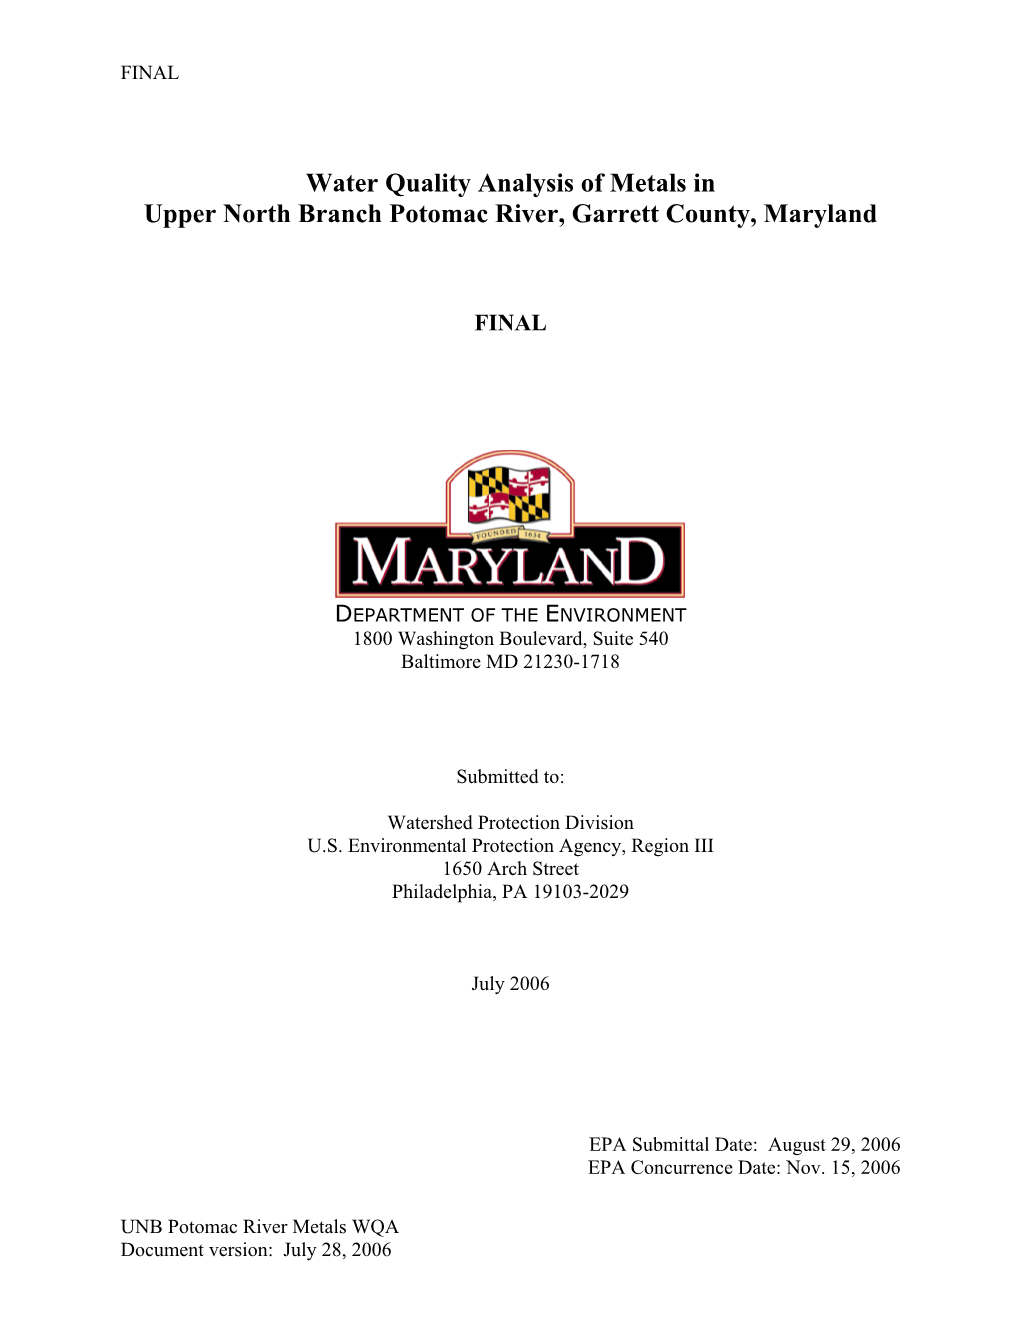 Water Quality Analysis of Metals in Upper North Branch Potomac River, Garrett County, Maryland